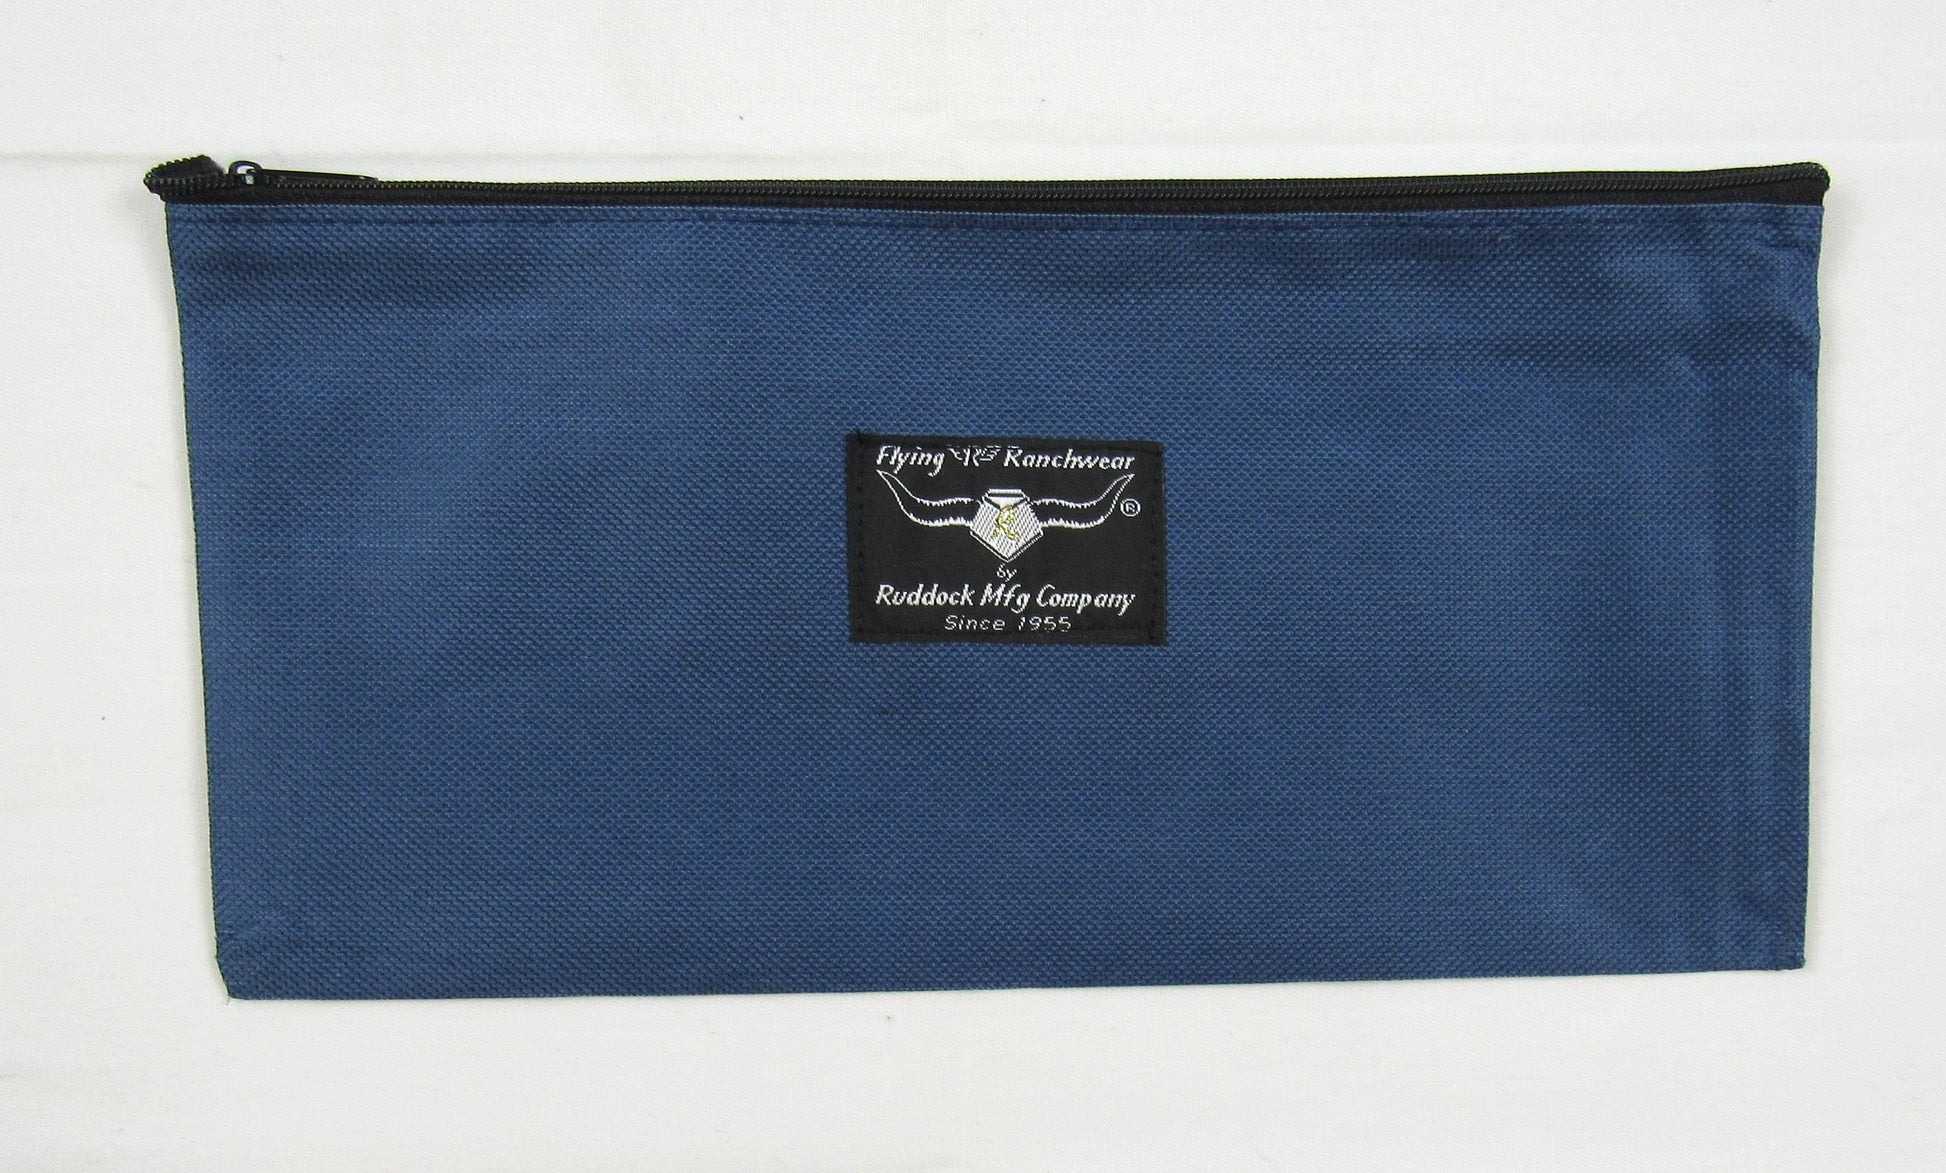 zippered gear bag in navy blue color